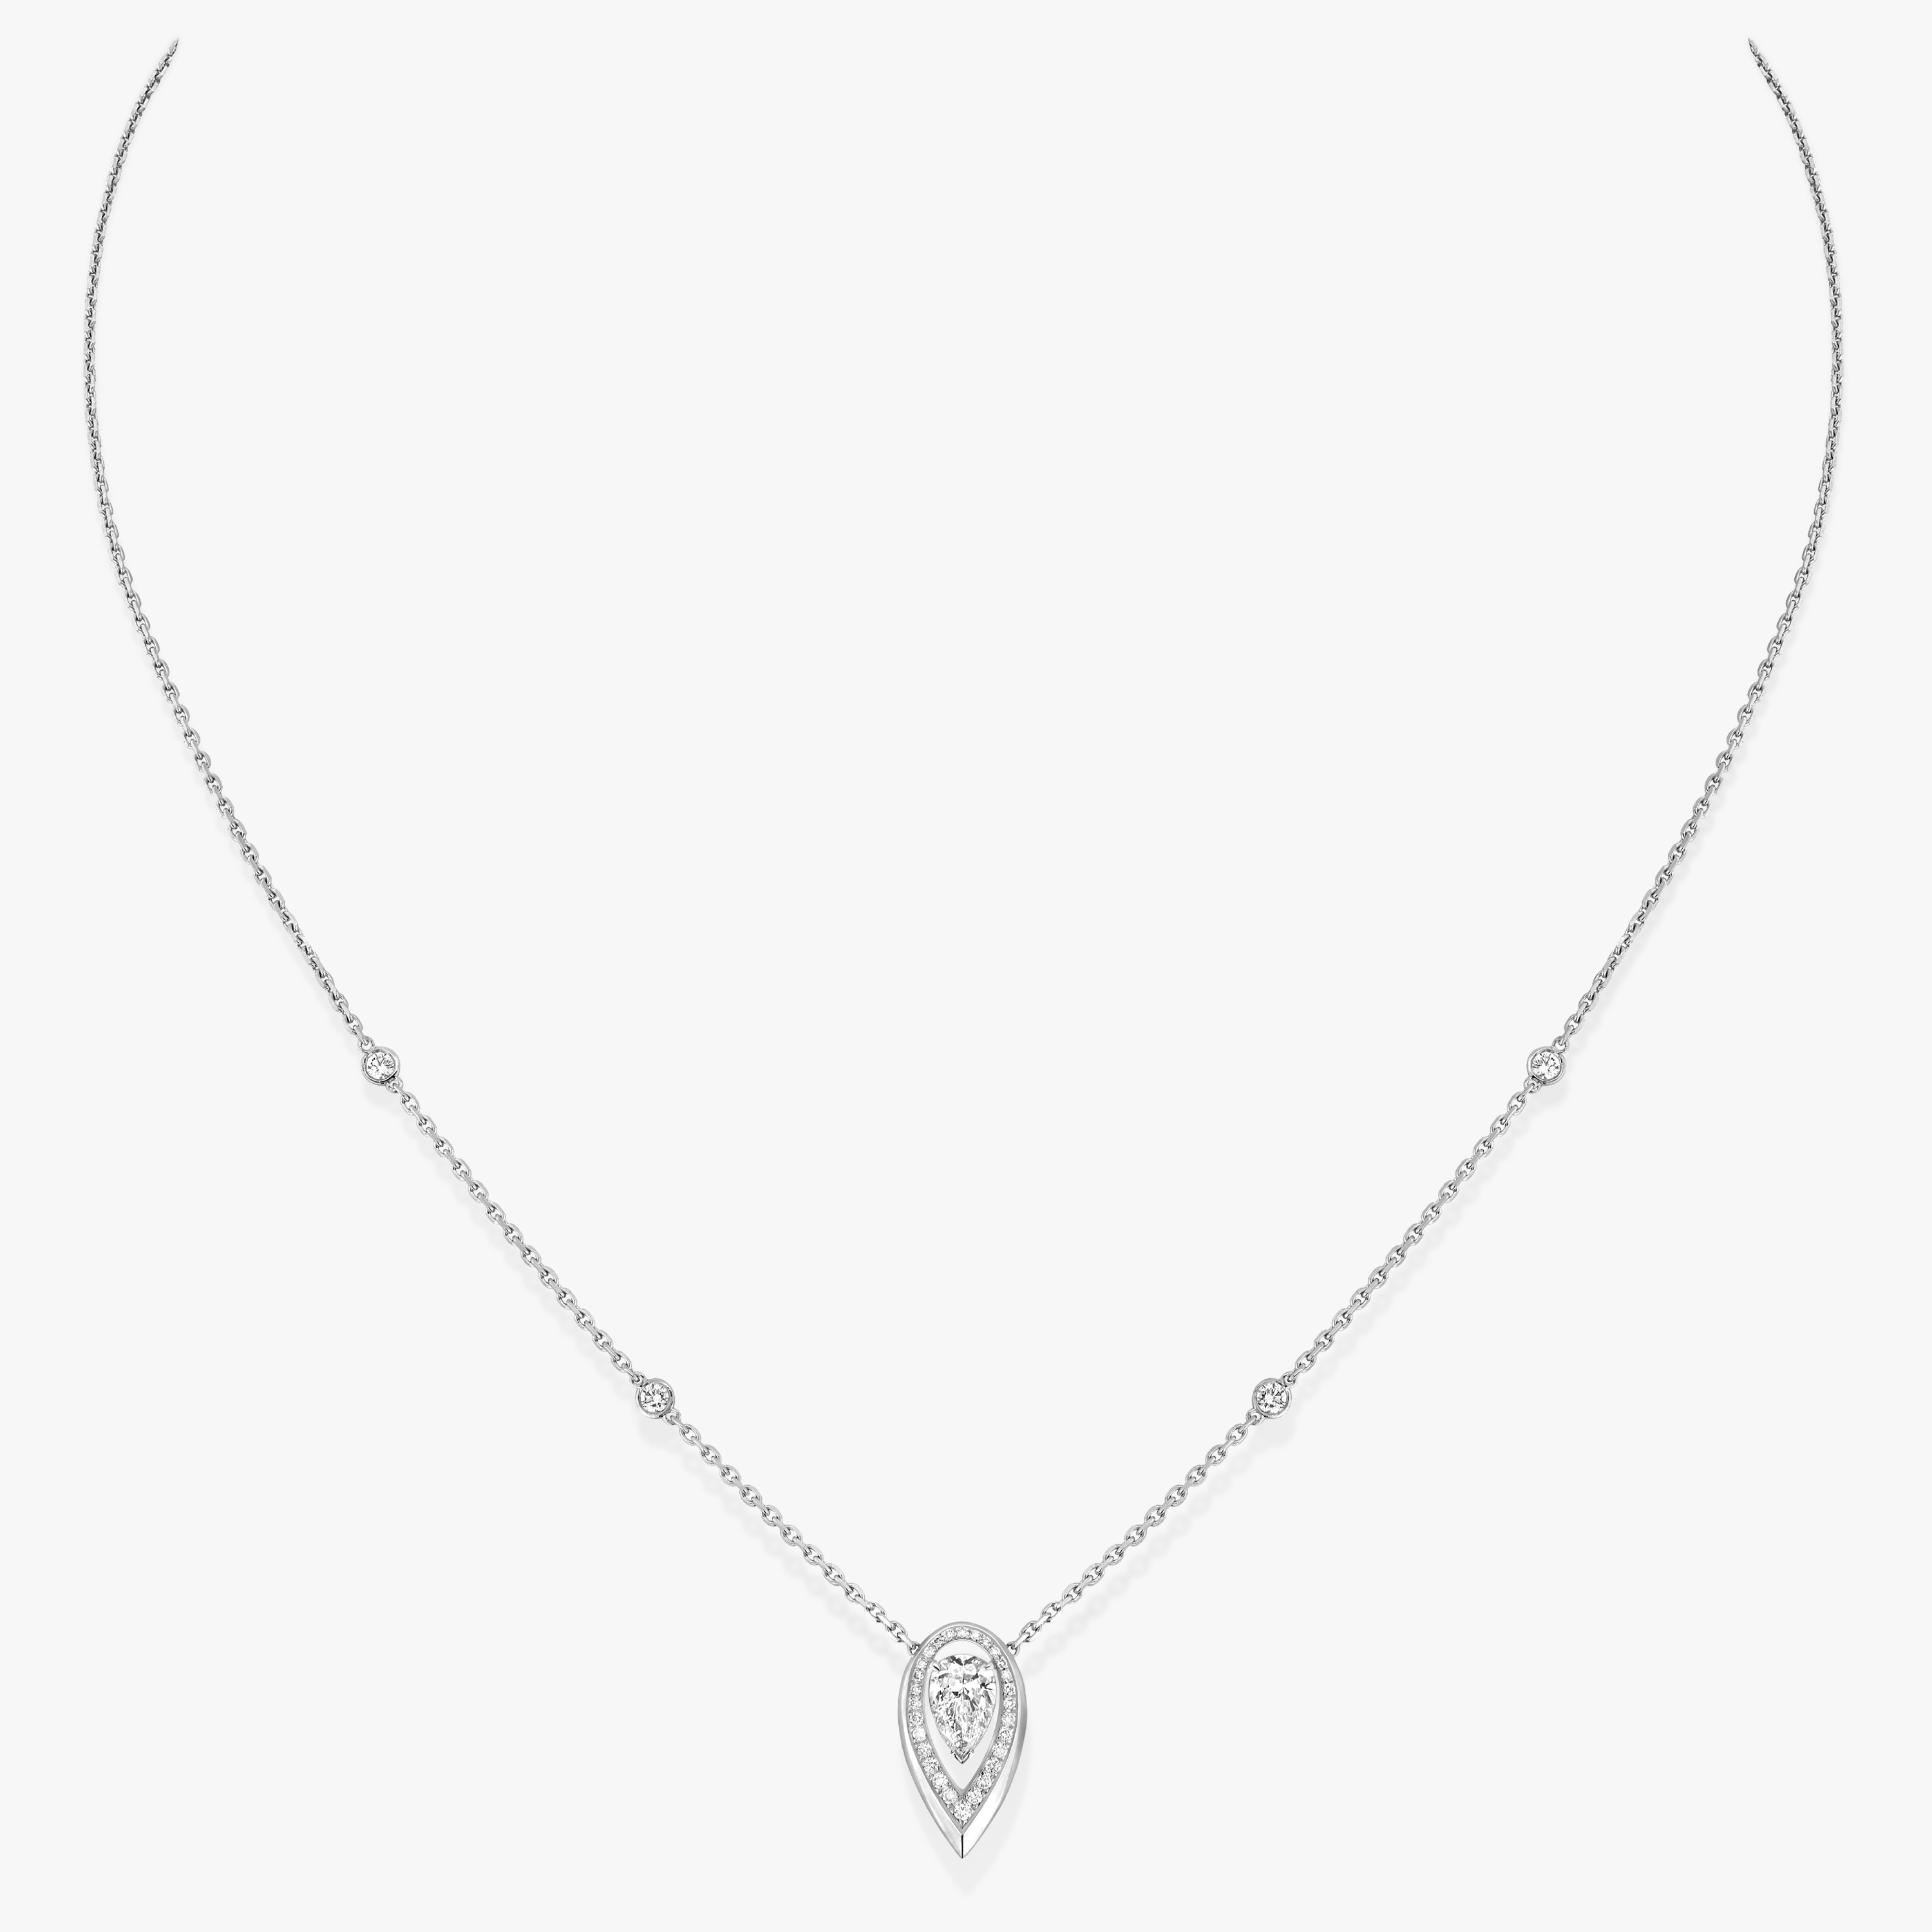 Necklace For Her White Gold Diamond Fiery 0.25ct 13239-WG